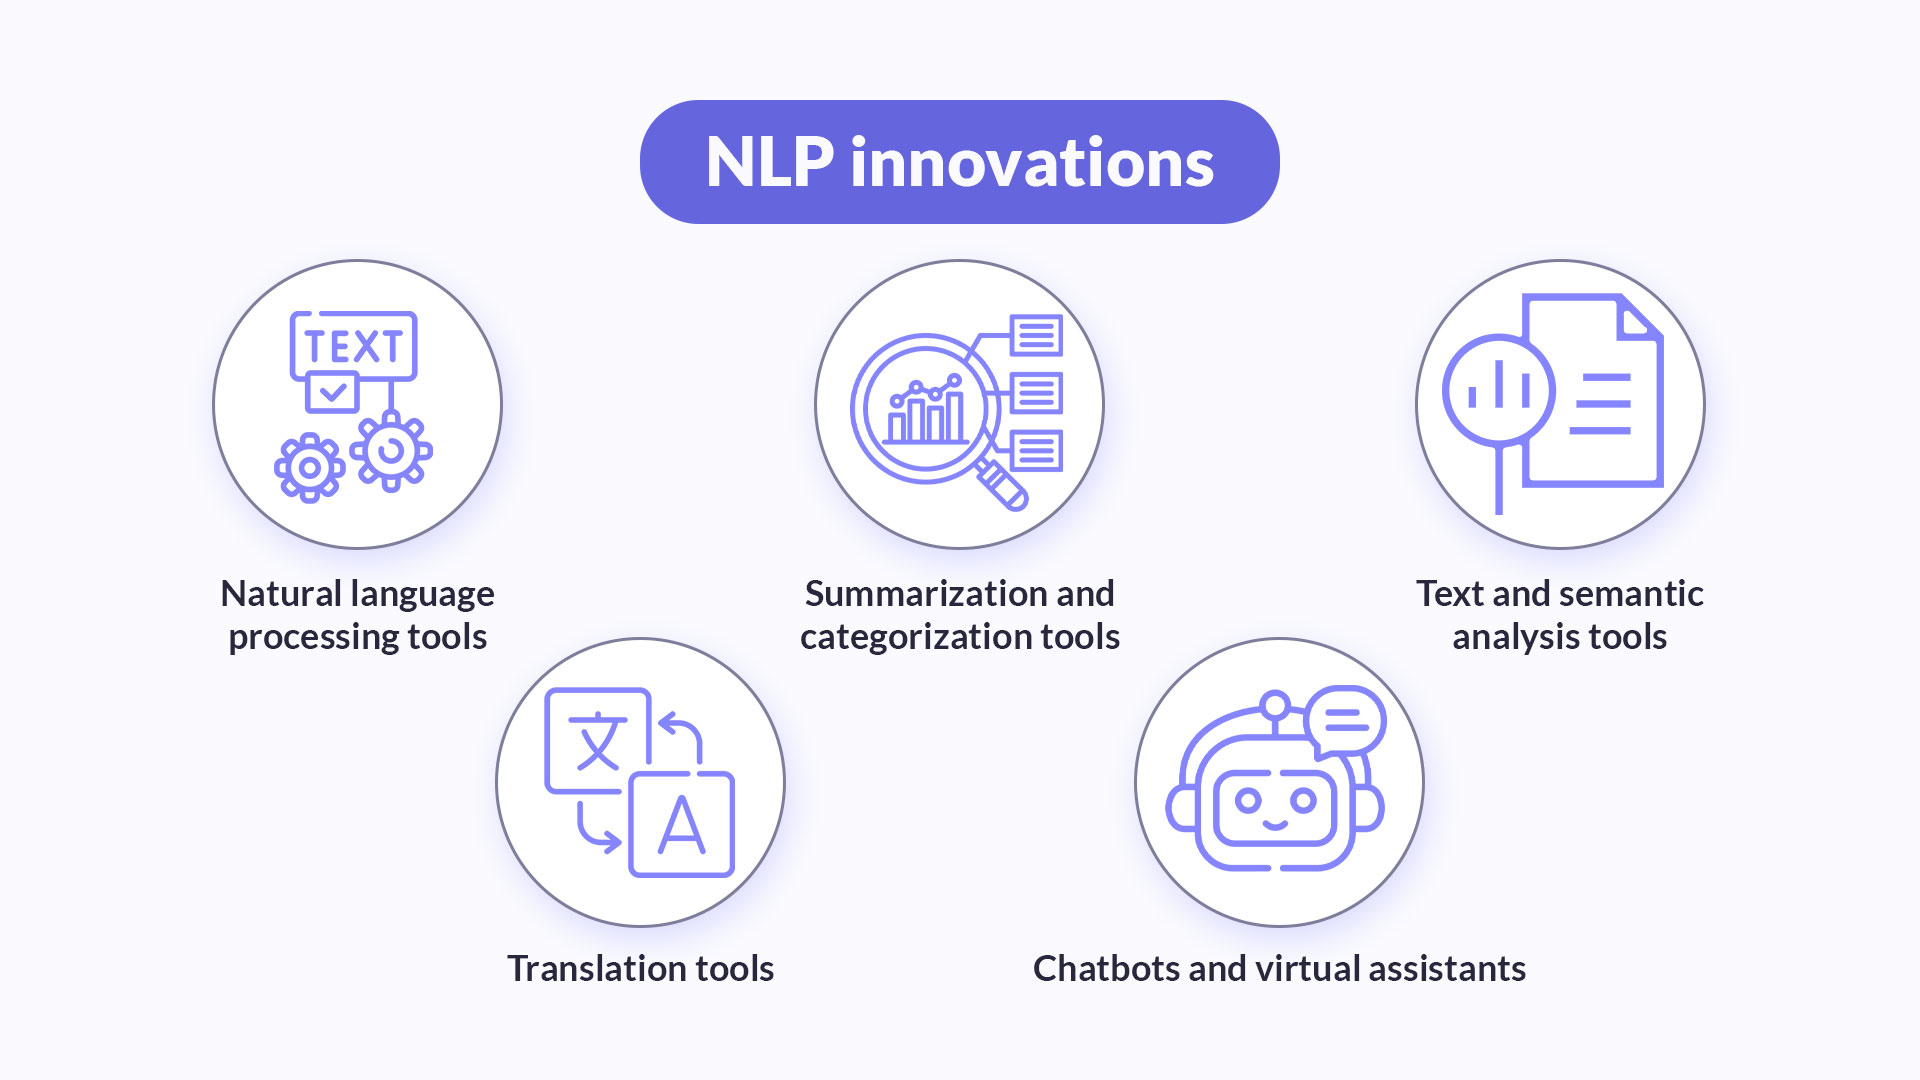 NLP applications in education